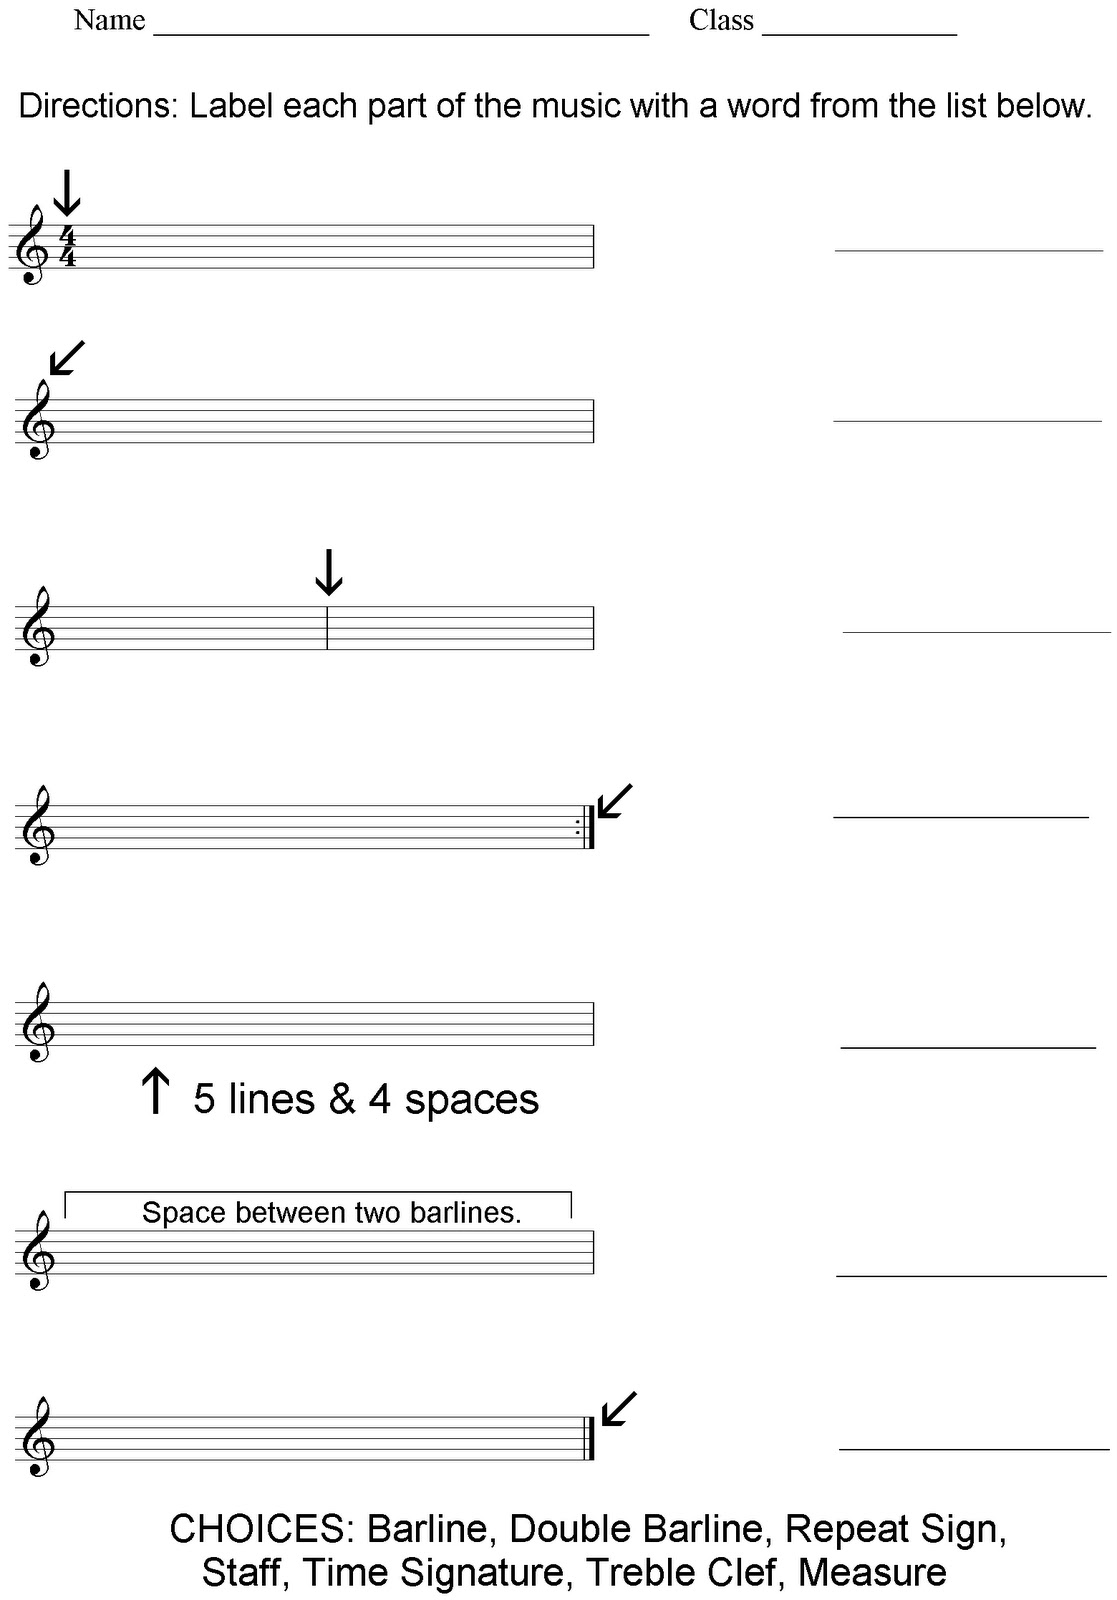 4th-grade-worksheets-exclusive-music